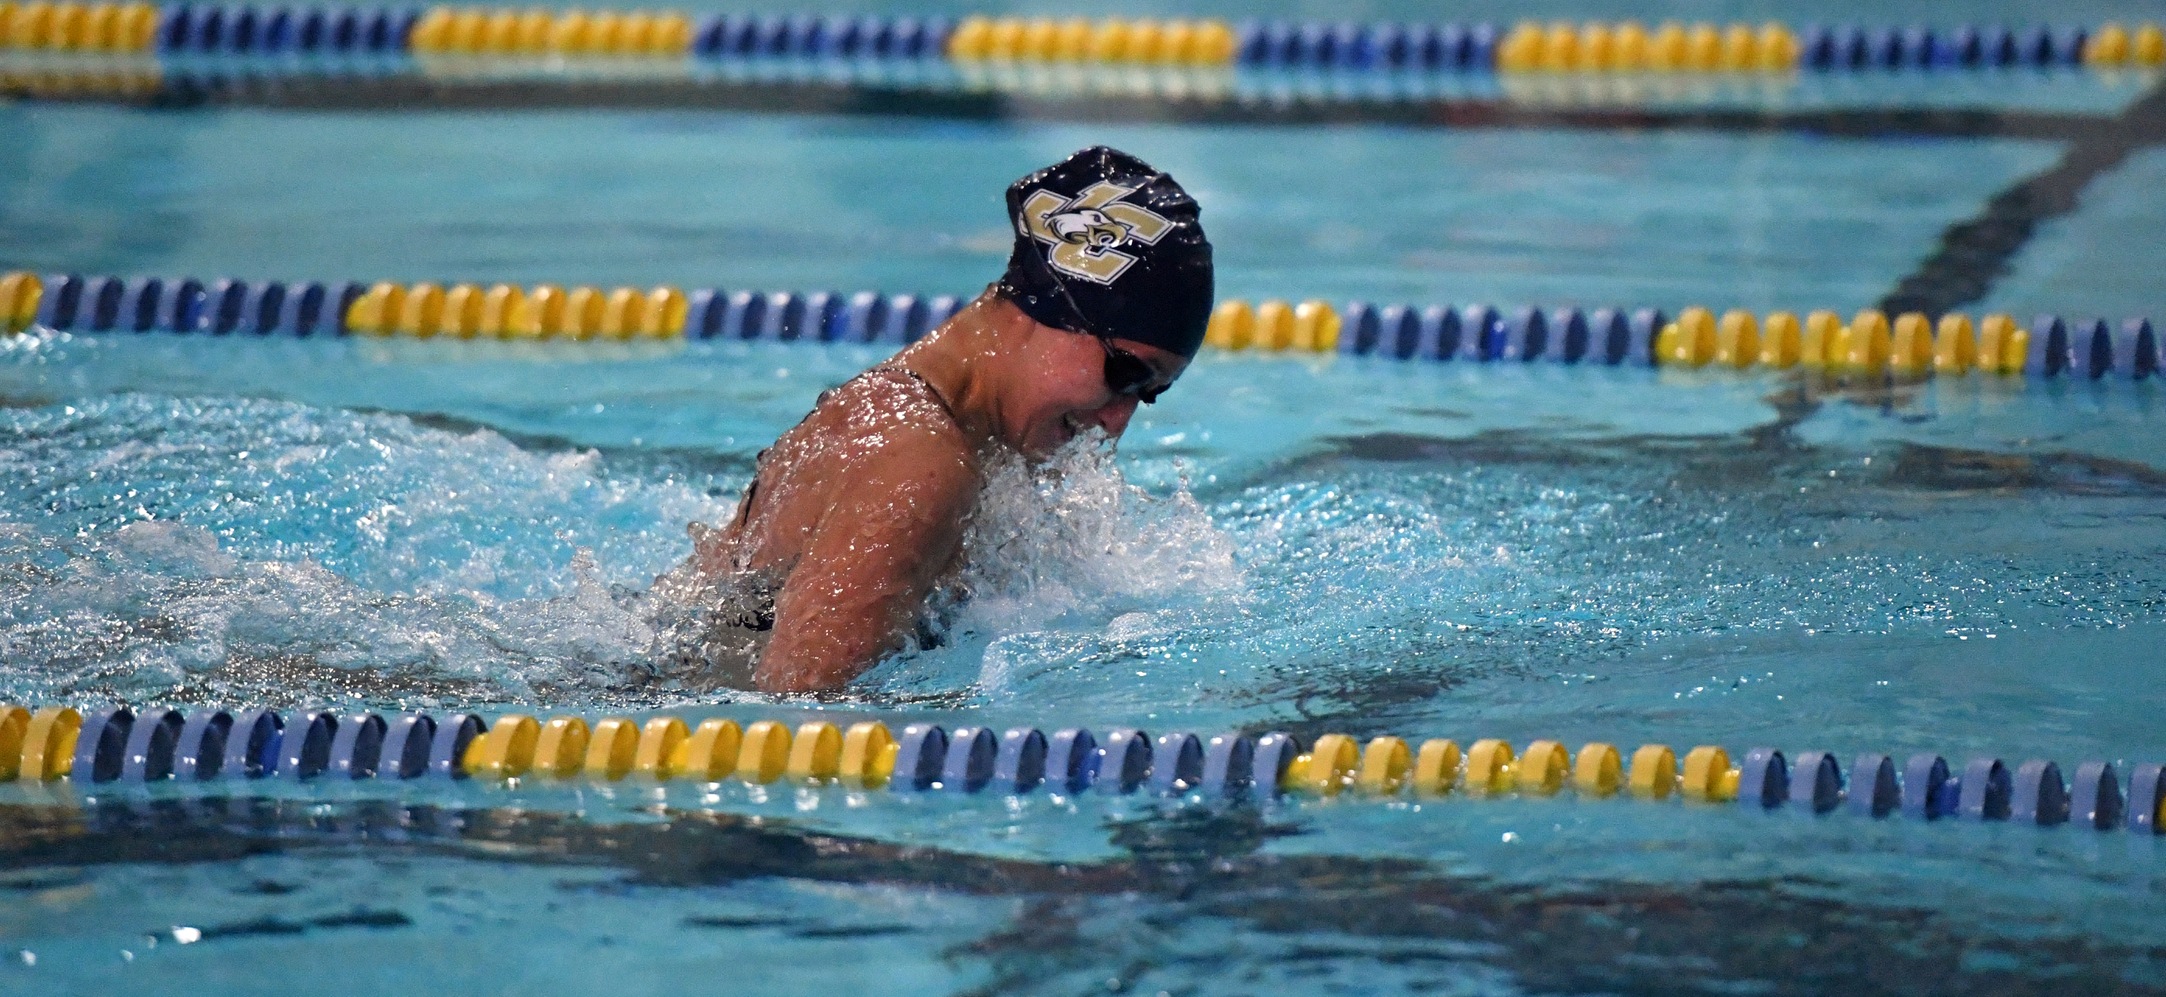 Cassie Sanidad won all three of her events; the 400 medley relay, the 200 fly, and the 200 breaststroke.